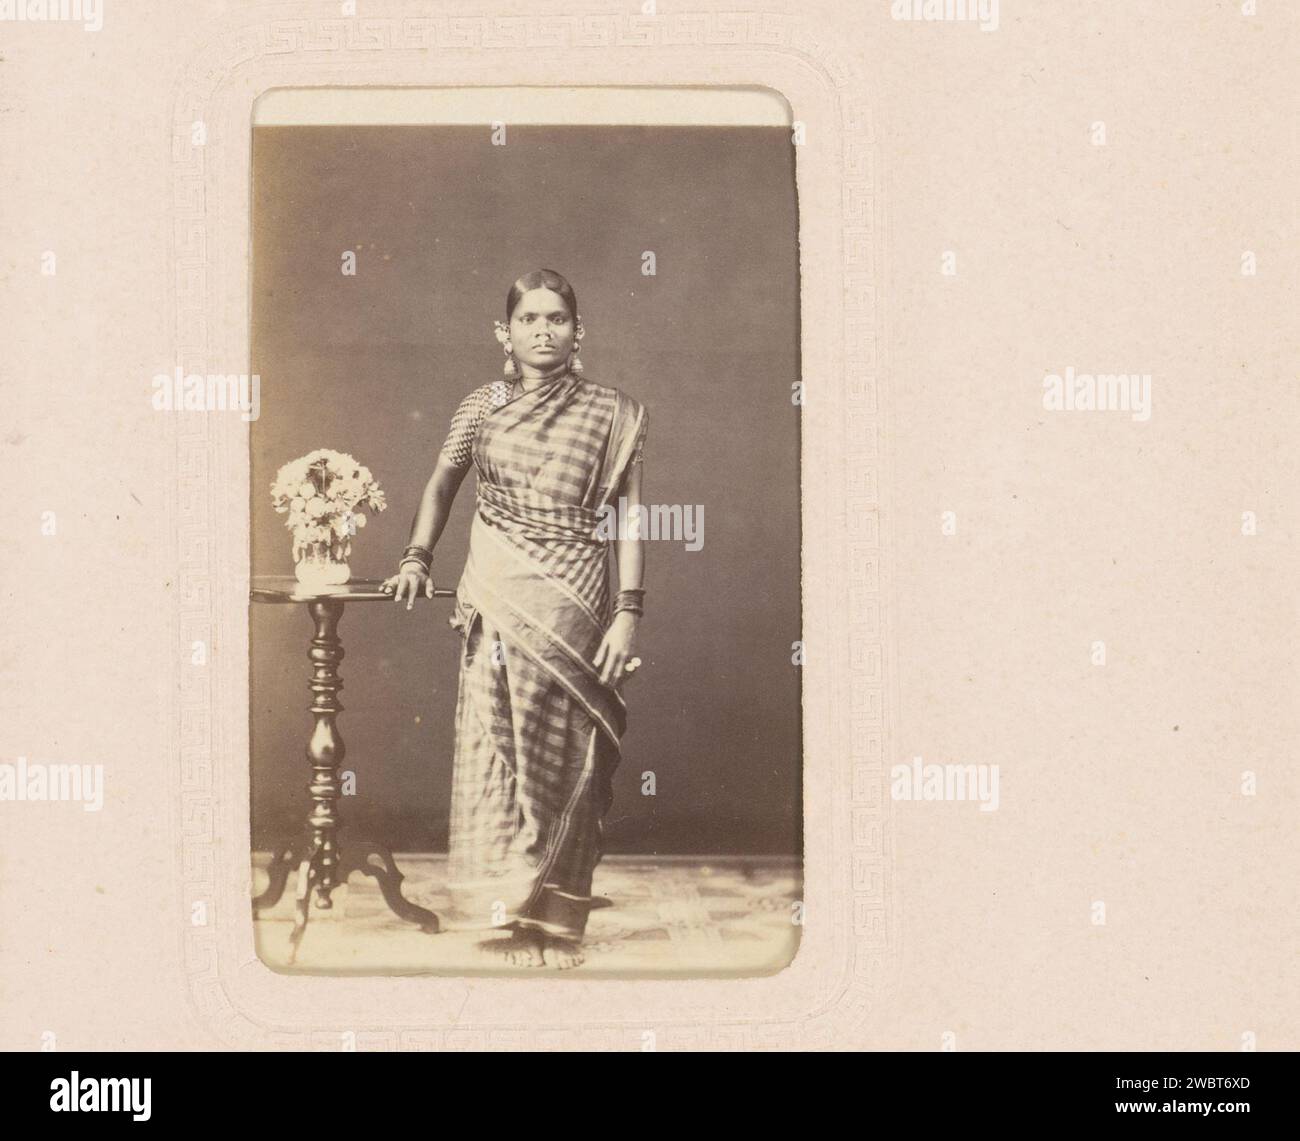 Portrait of an Indian woman, G.R. Lambert & Co., 1867 - 1880 Photograph. visit card This photo is part of an album. Singapore photographic support. cardboard albumen print historical persons - BB - woman Stock Photo